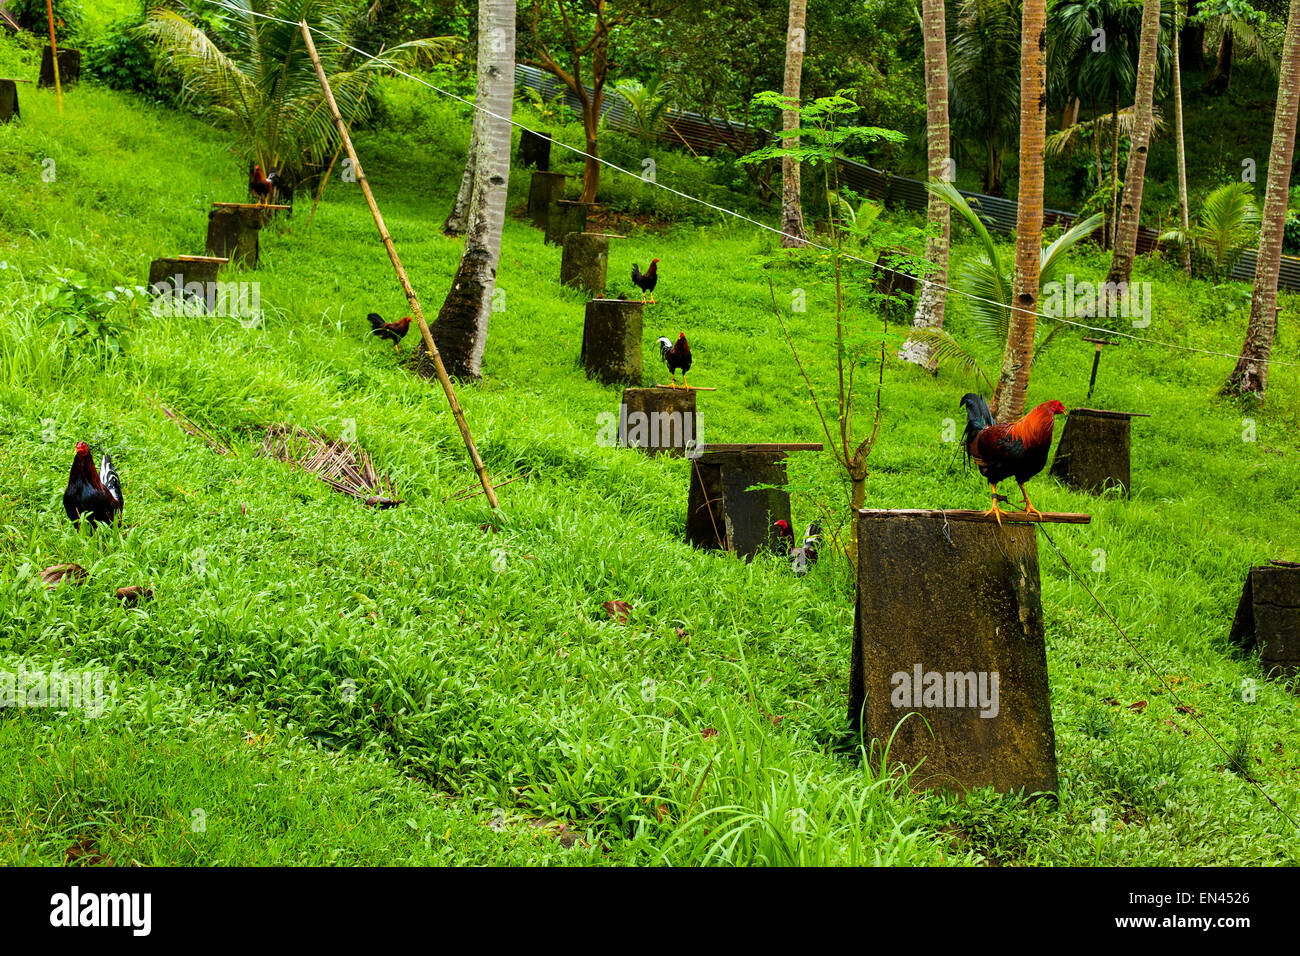 Roosters abound on a chicken ranch in the city of Famy, province of Laguna, Philippines on 25 December 2014. Stock Photo